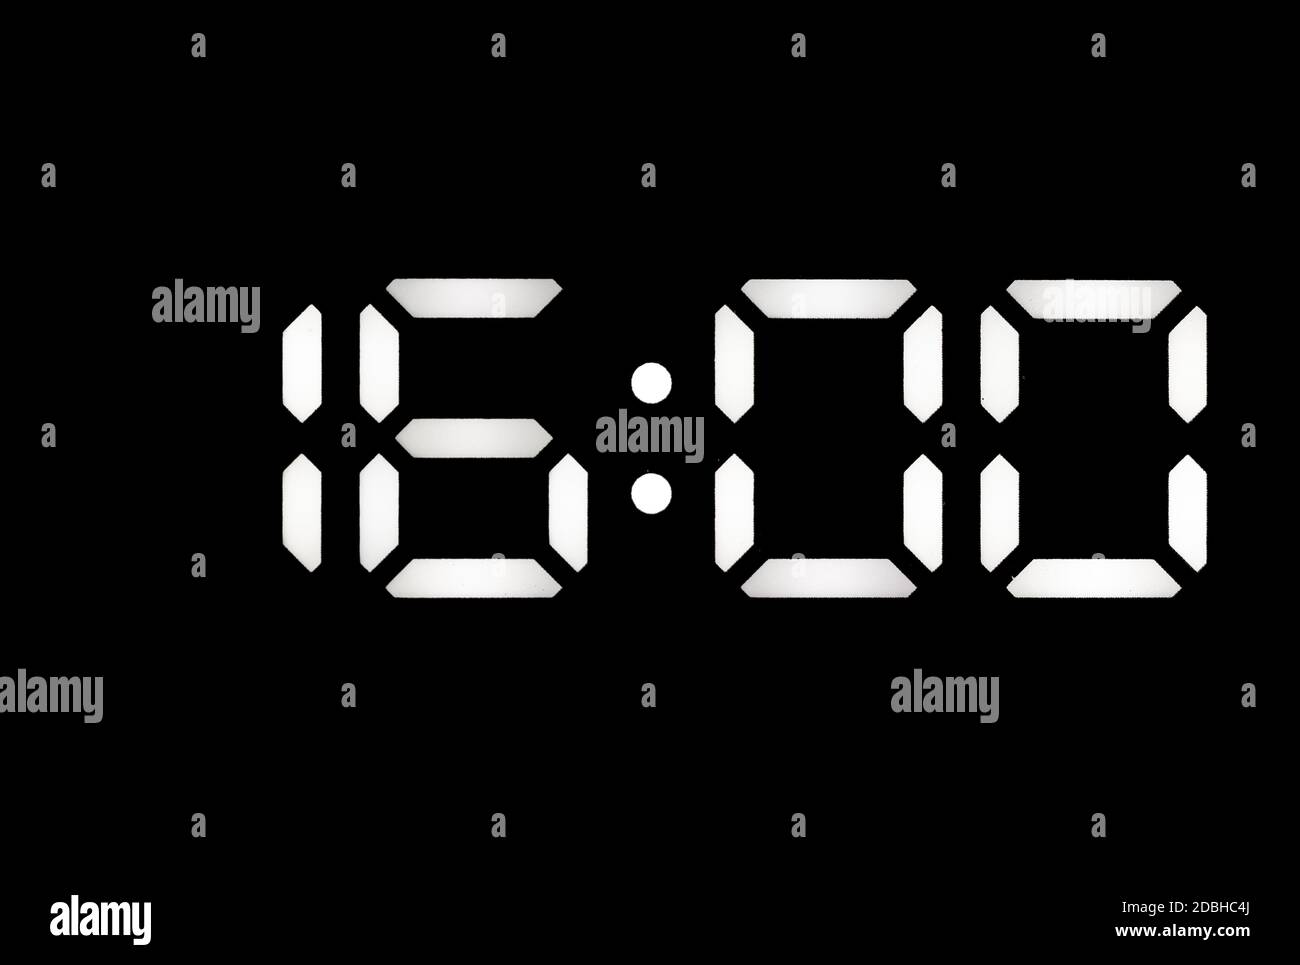 Real white led digital clock on a black background showing time 16:00 Stock Photo